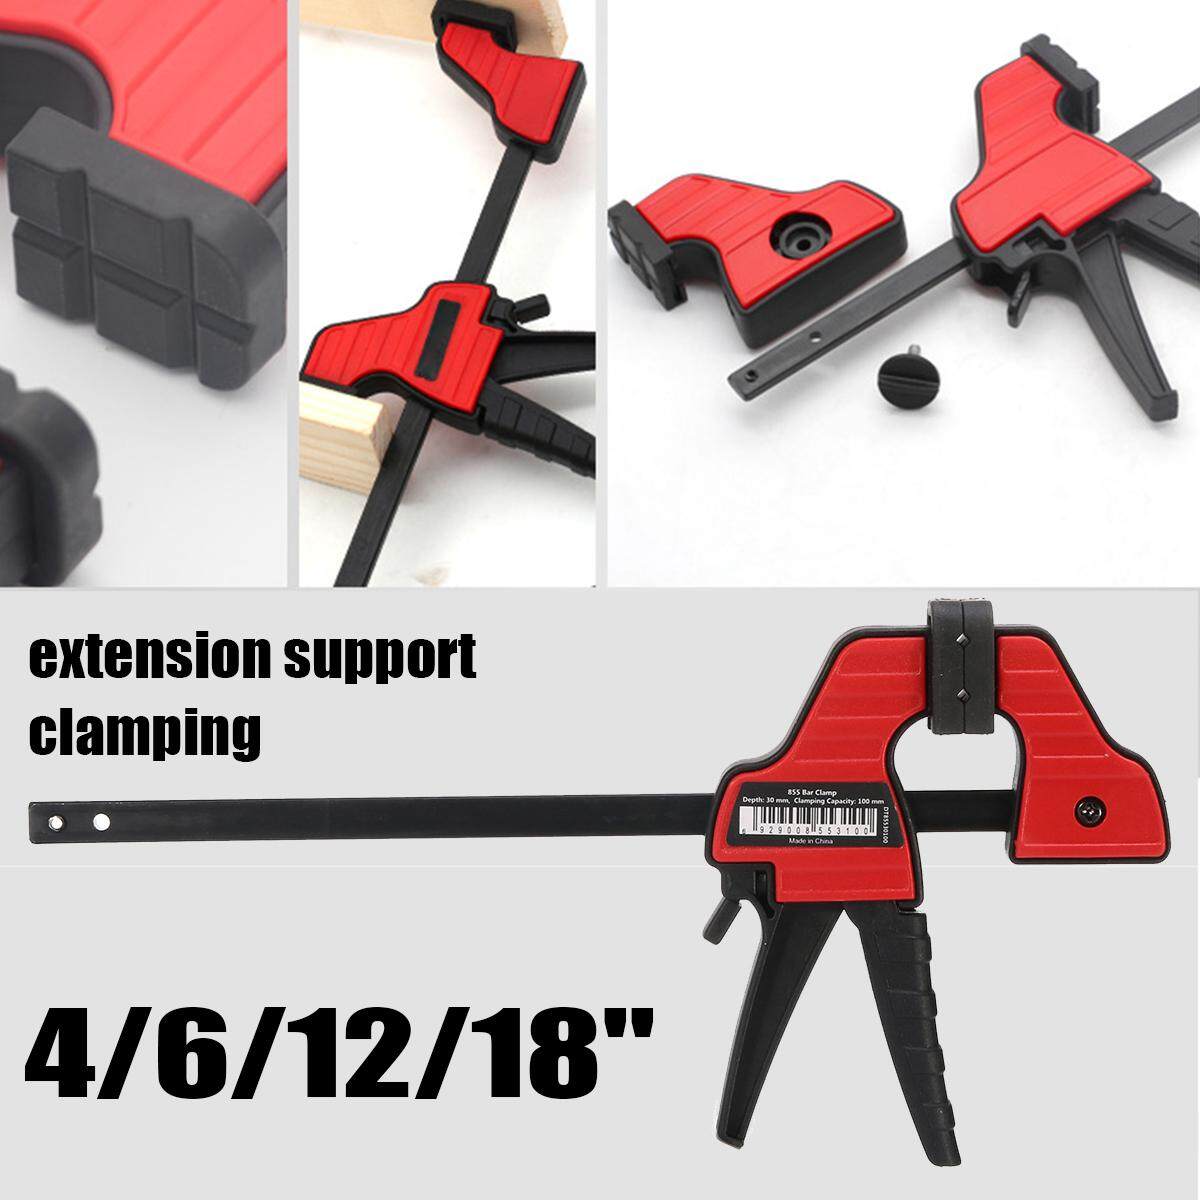 4 inch DURATEC Heavy Duty Strong Clamping Force Durable Quick Grip One-Handed Bar Clamp for Woodworking